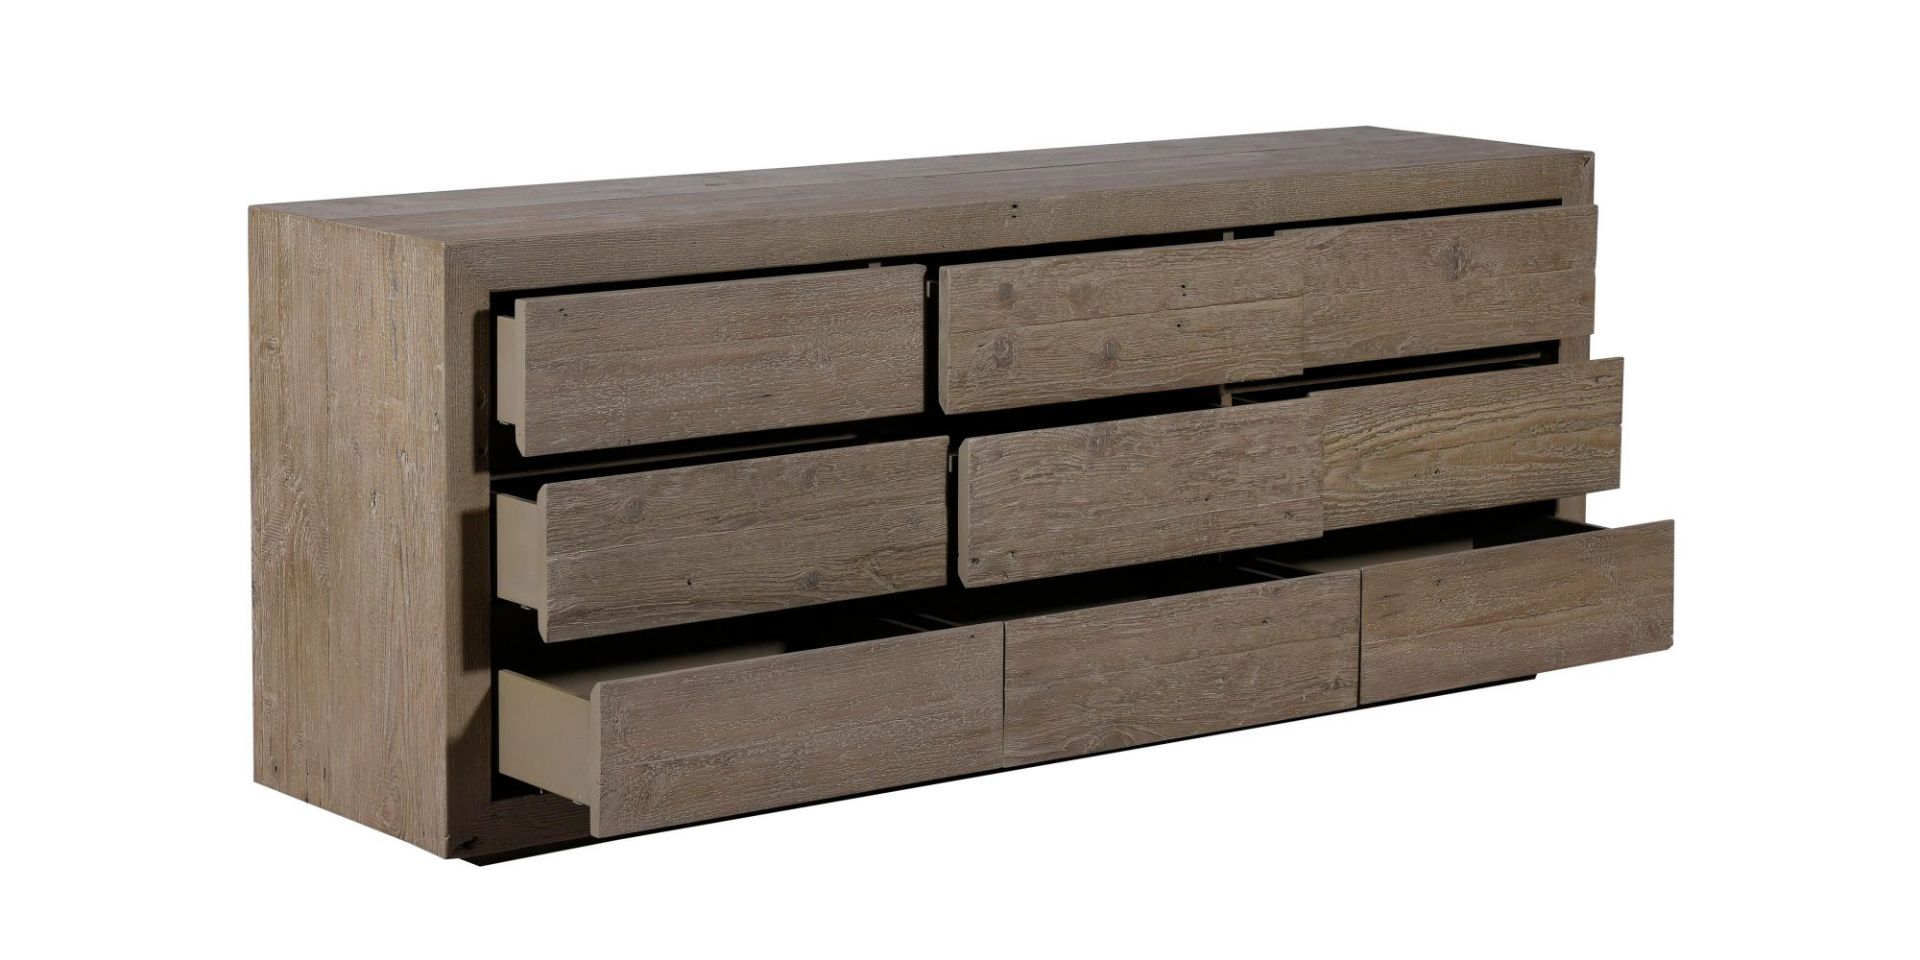 Quad Sideboard Finished In Worn Board With Nine Drawers Made From Reclaimed Floorboards Bringing - Image 2 of 2